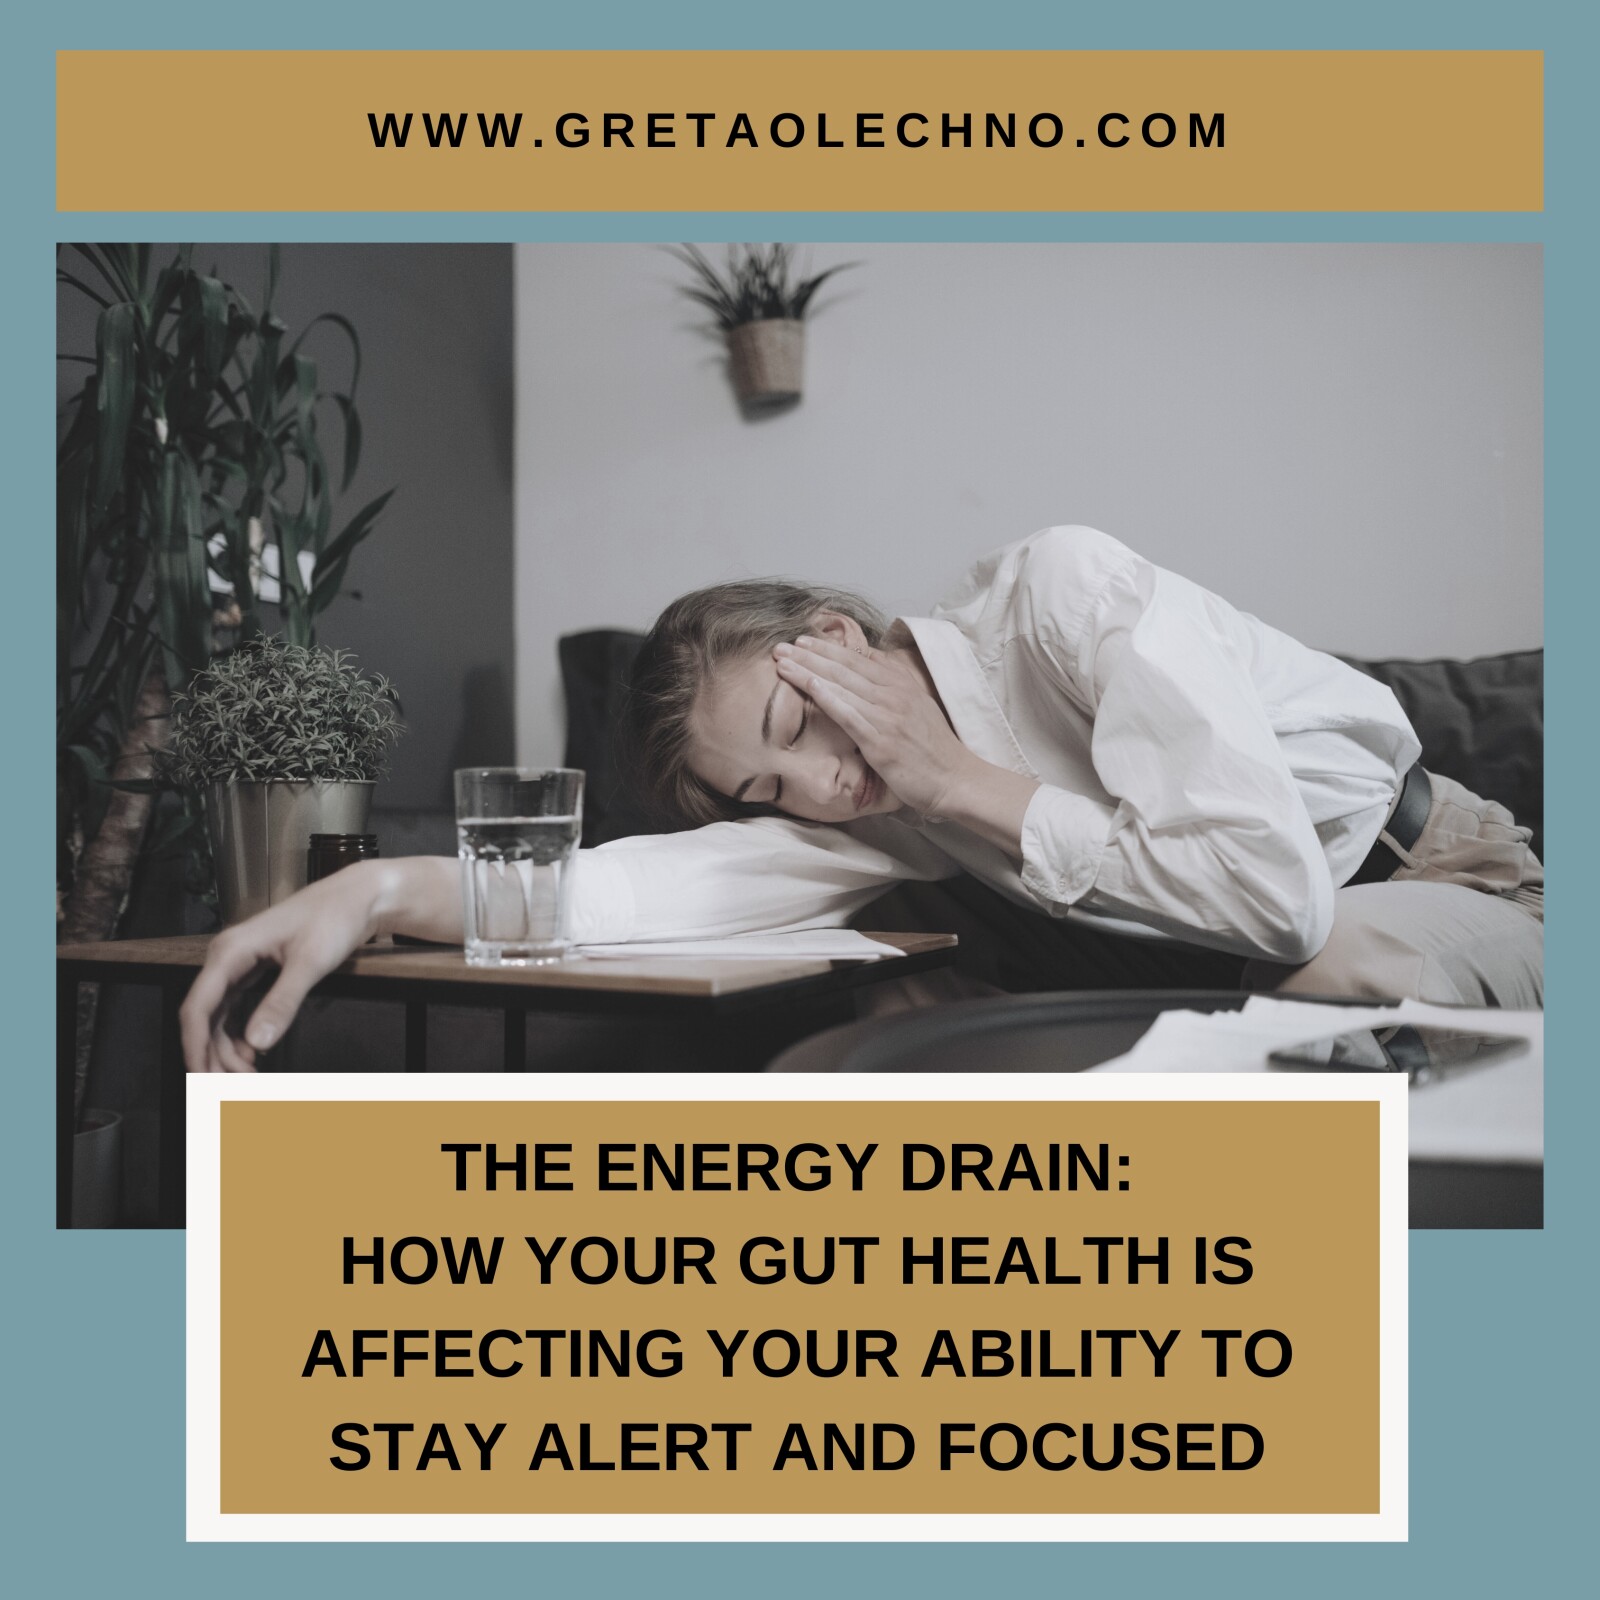 The Energy Drain: How Your Gut Health is Affecting Your Ability to Stay Alert and Focused